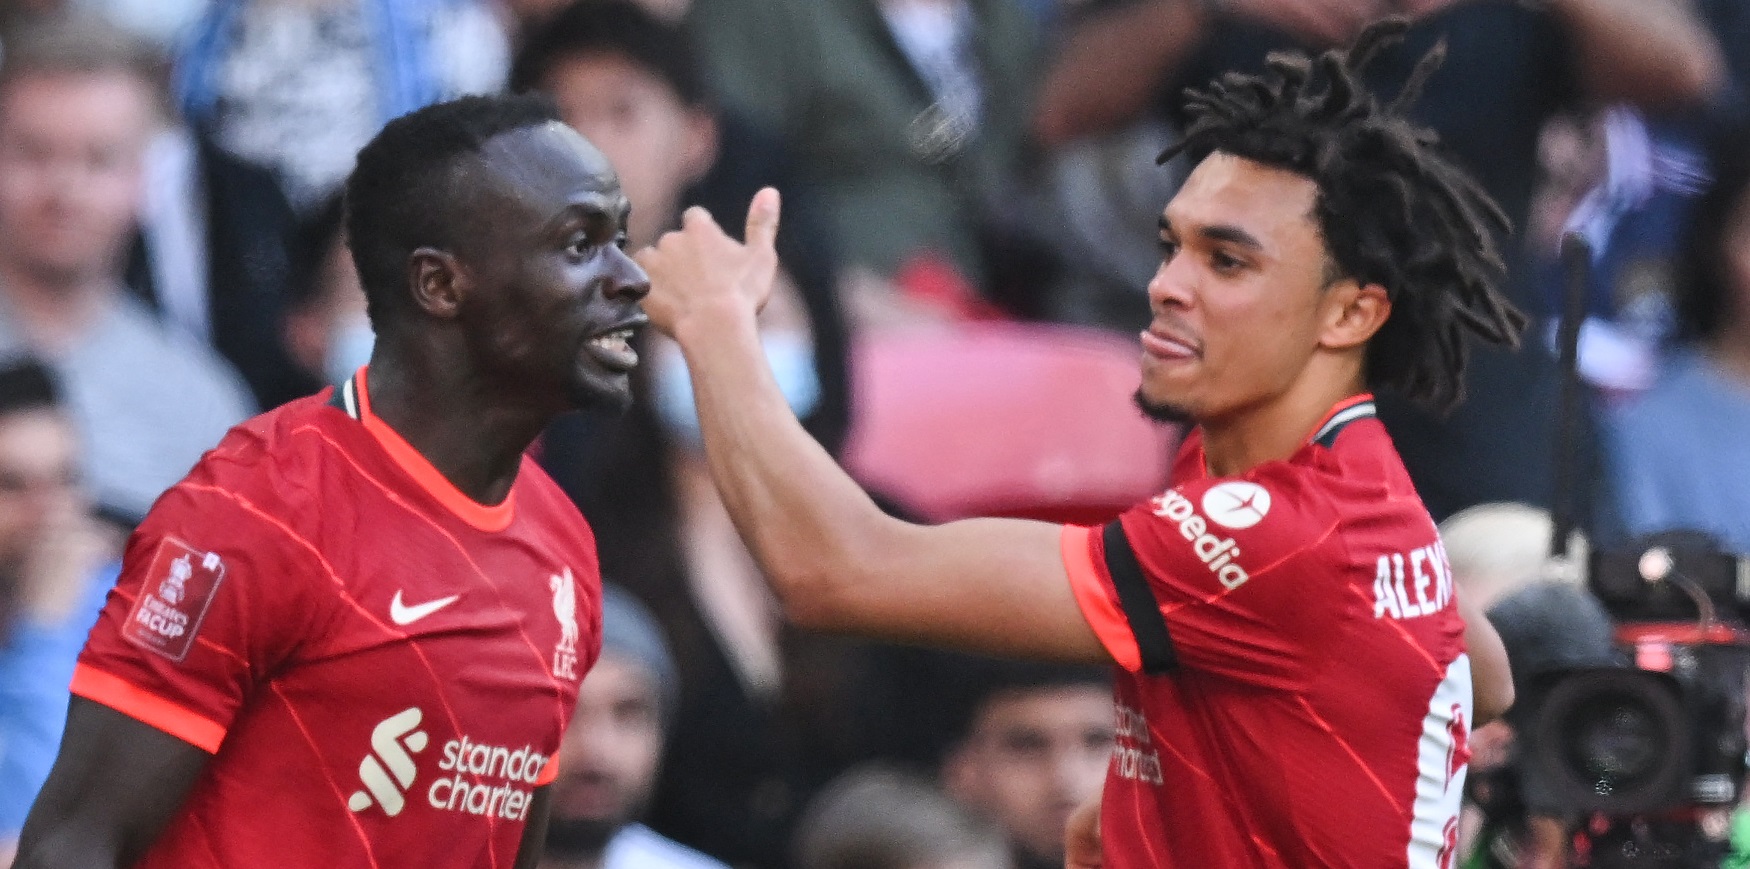 Carragher issues 11-word tweet response to Mane masterclass as forward puts Liverpool 3-0 up in stunning first-half at Wembley